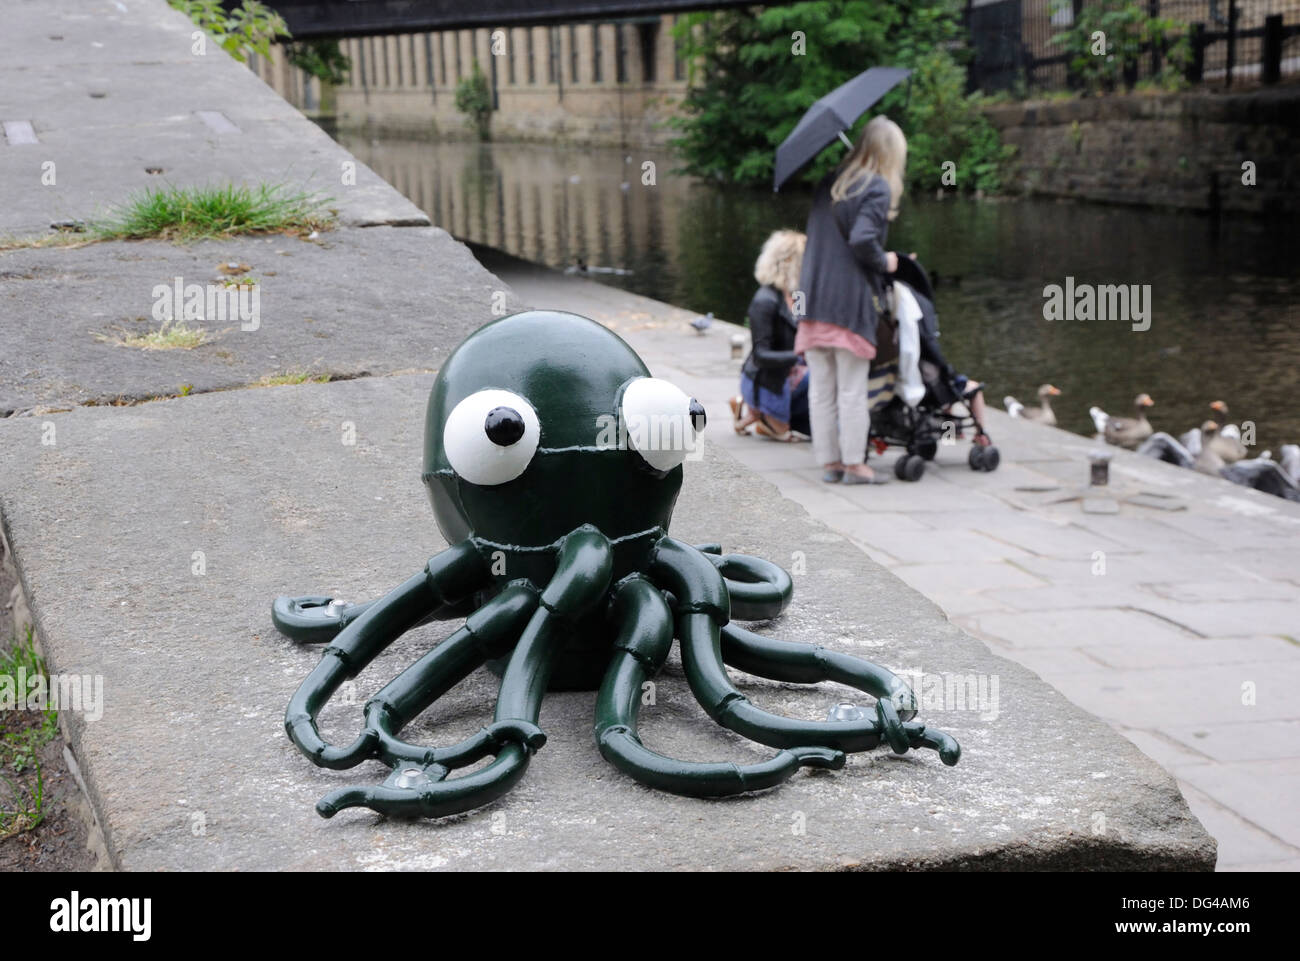 Octopus artwork by the Leeds and Liverpool canal, Saltaire, Bradford Stock Photo